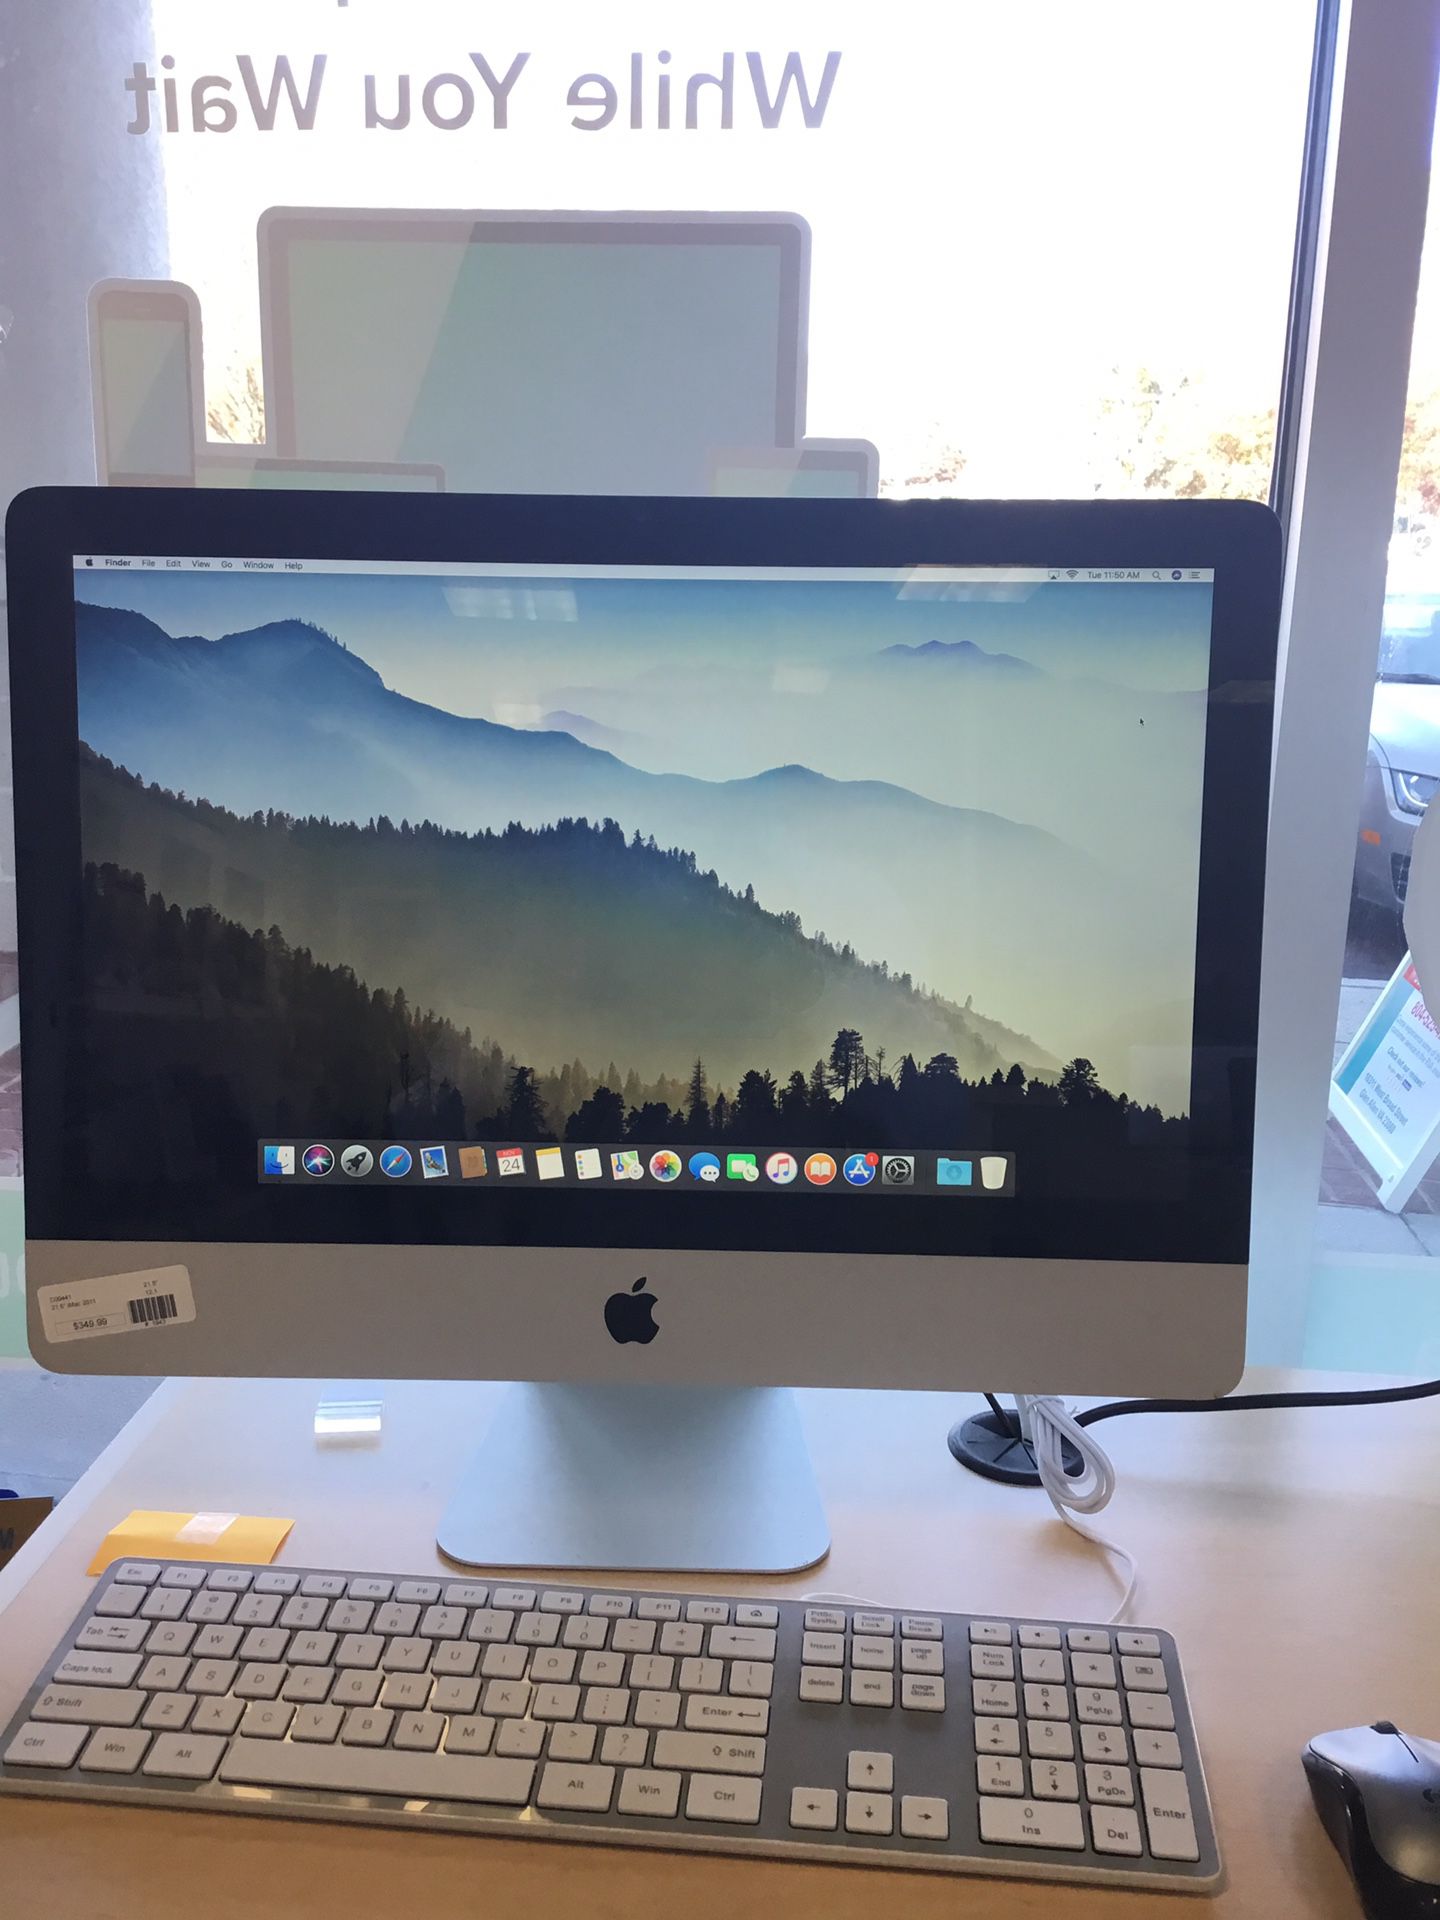 21.5” iMac 8GB RAM & 120GB SSD in excellent condition